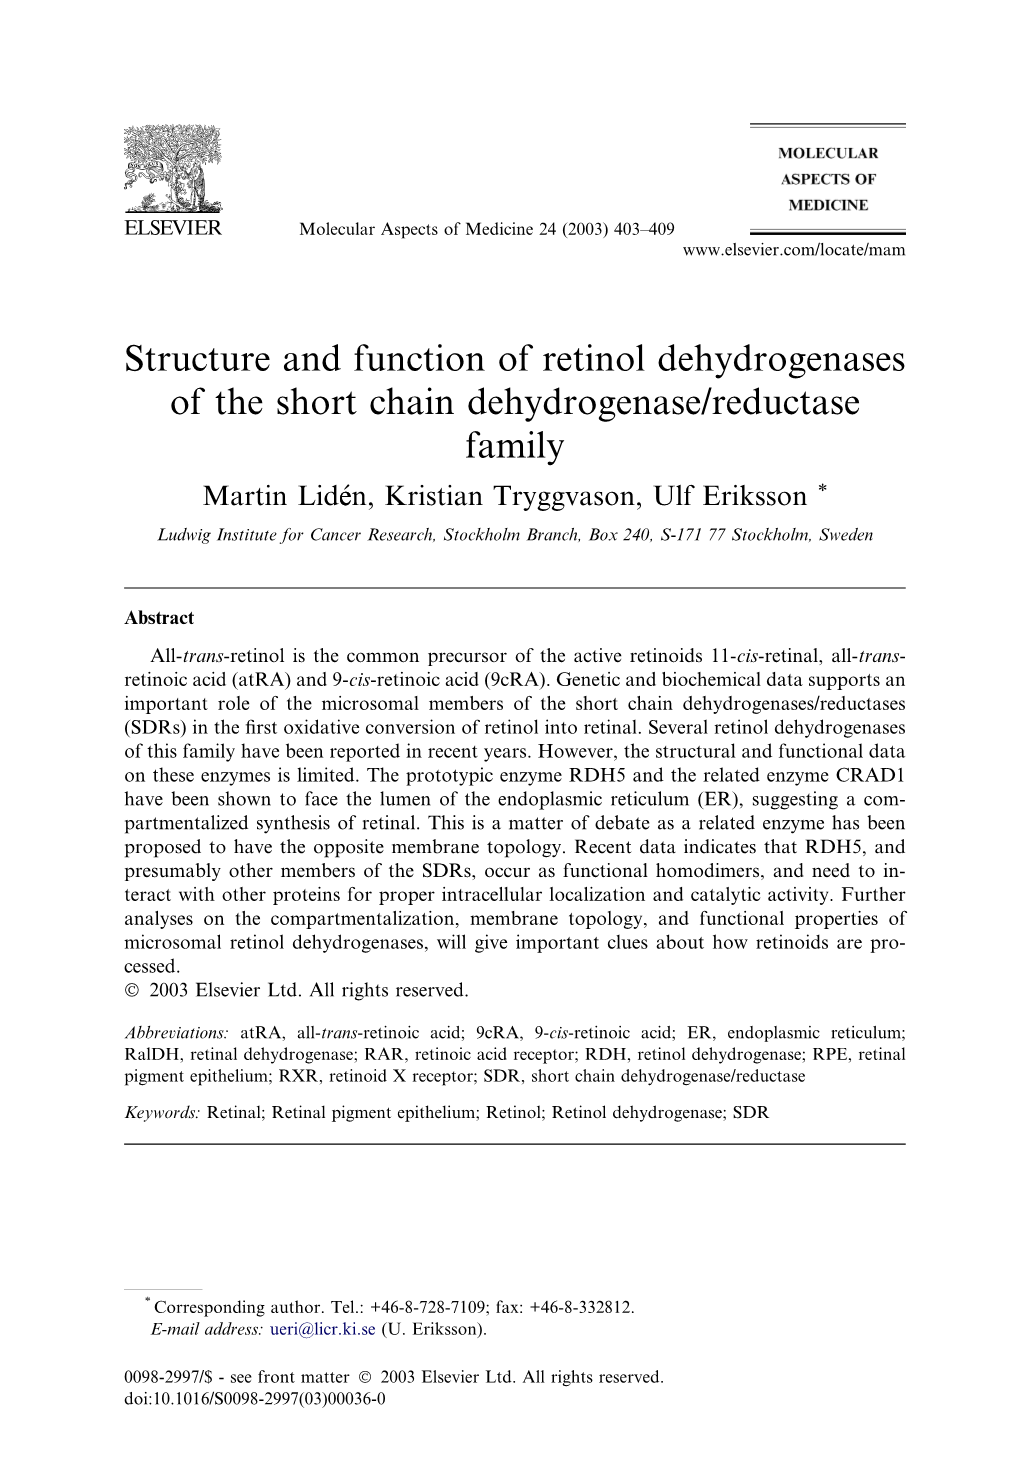 Structure and Function of Retinol Dehydrogenases of the Short Chain Dehydrogenase/Reductase Family